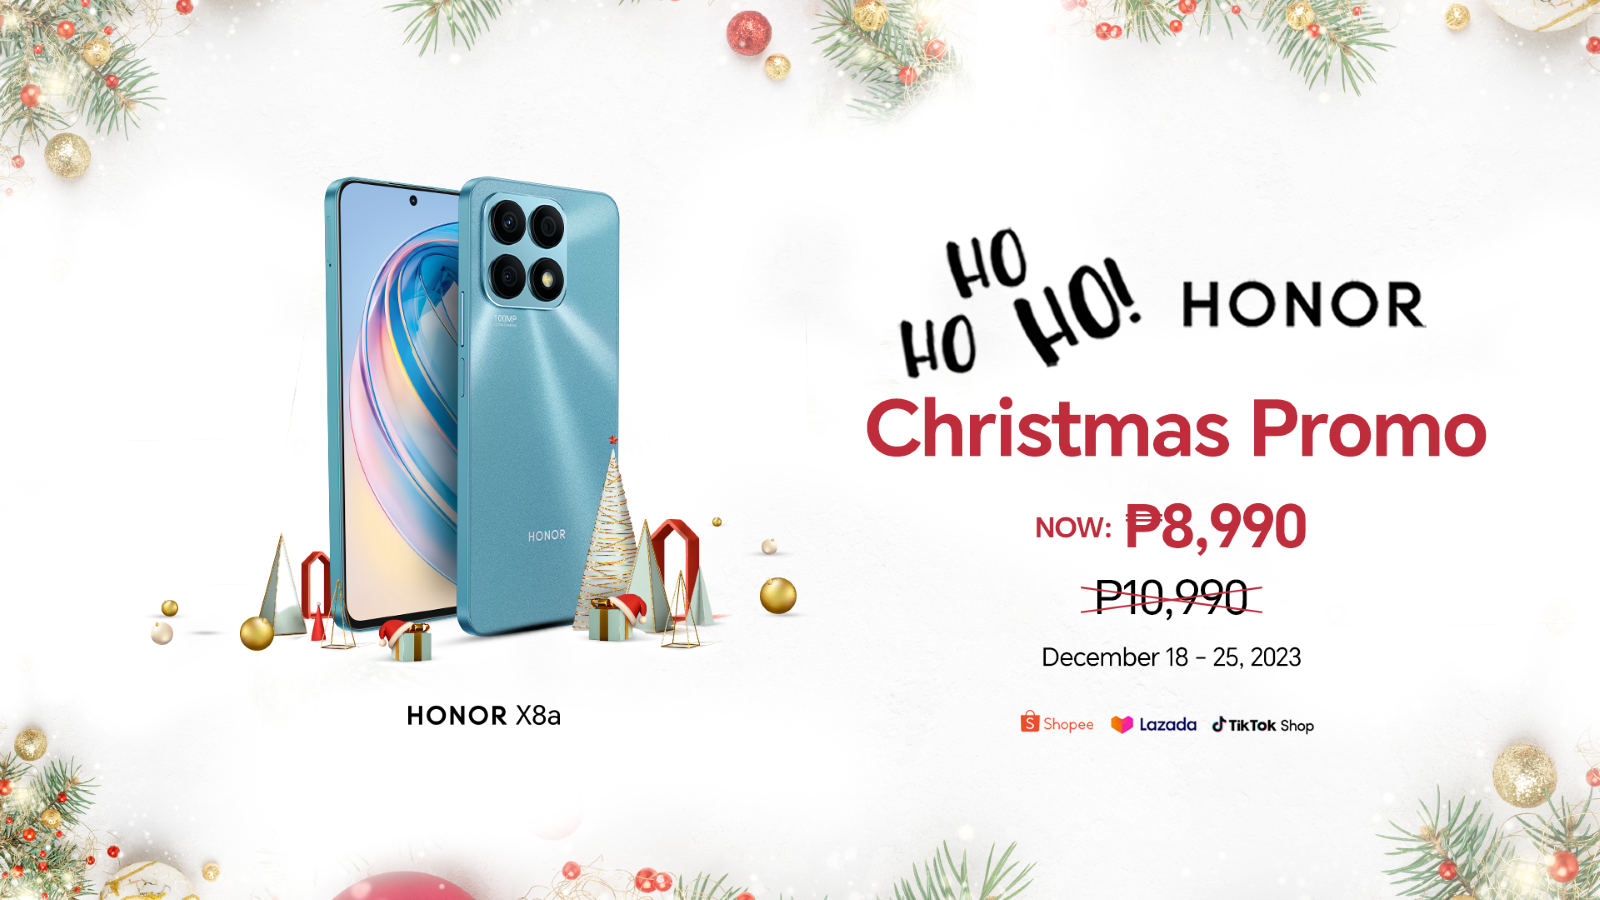 The holidays just got merrier as HONOR Philippines announces HONOR X8a 2,000-Peso Price Drop 